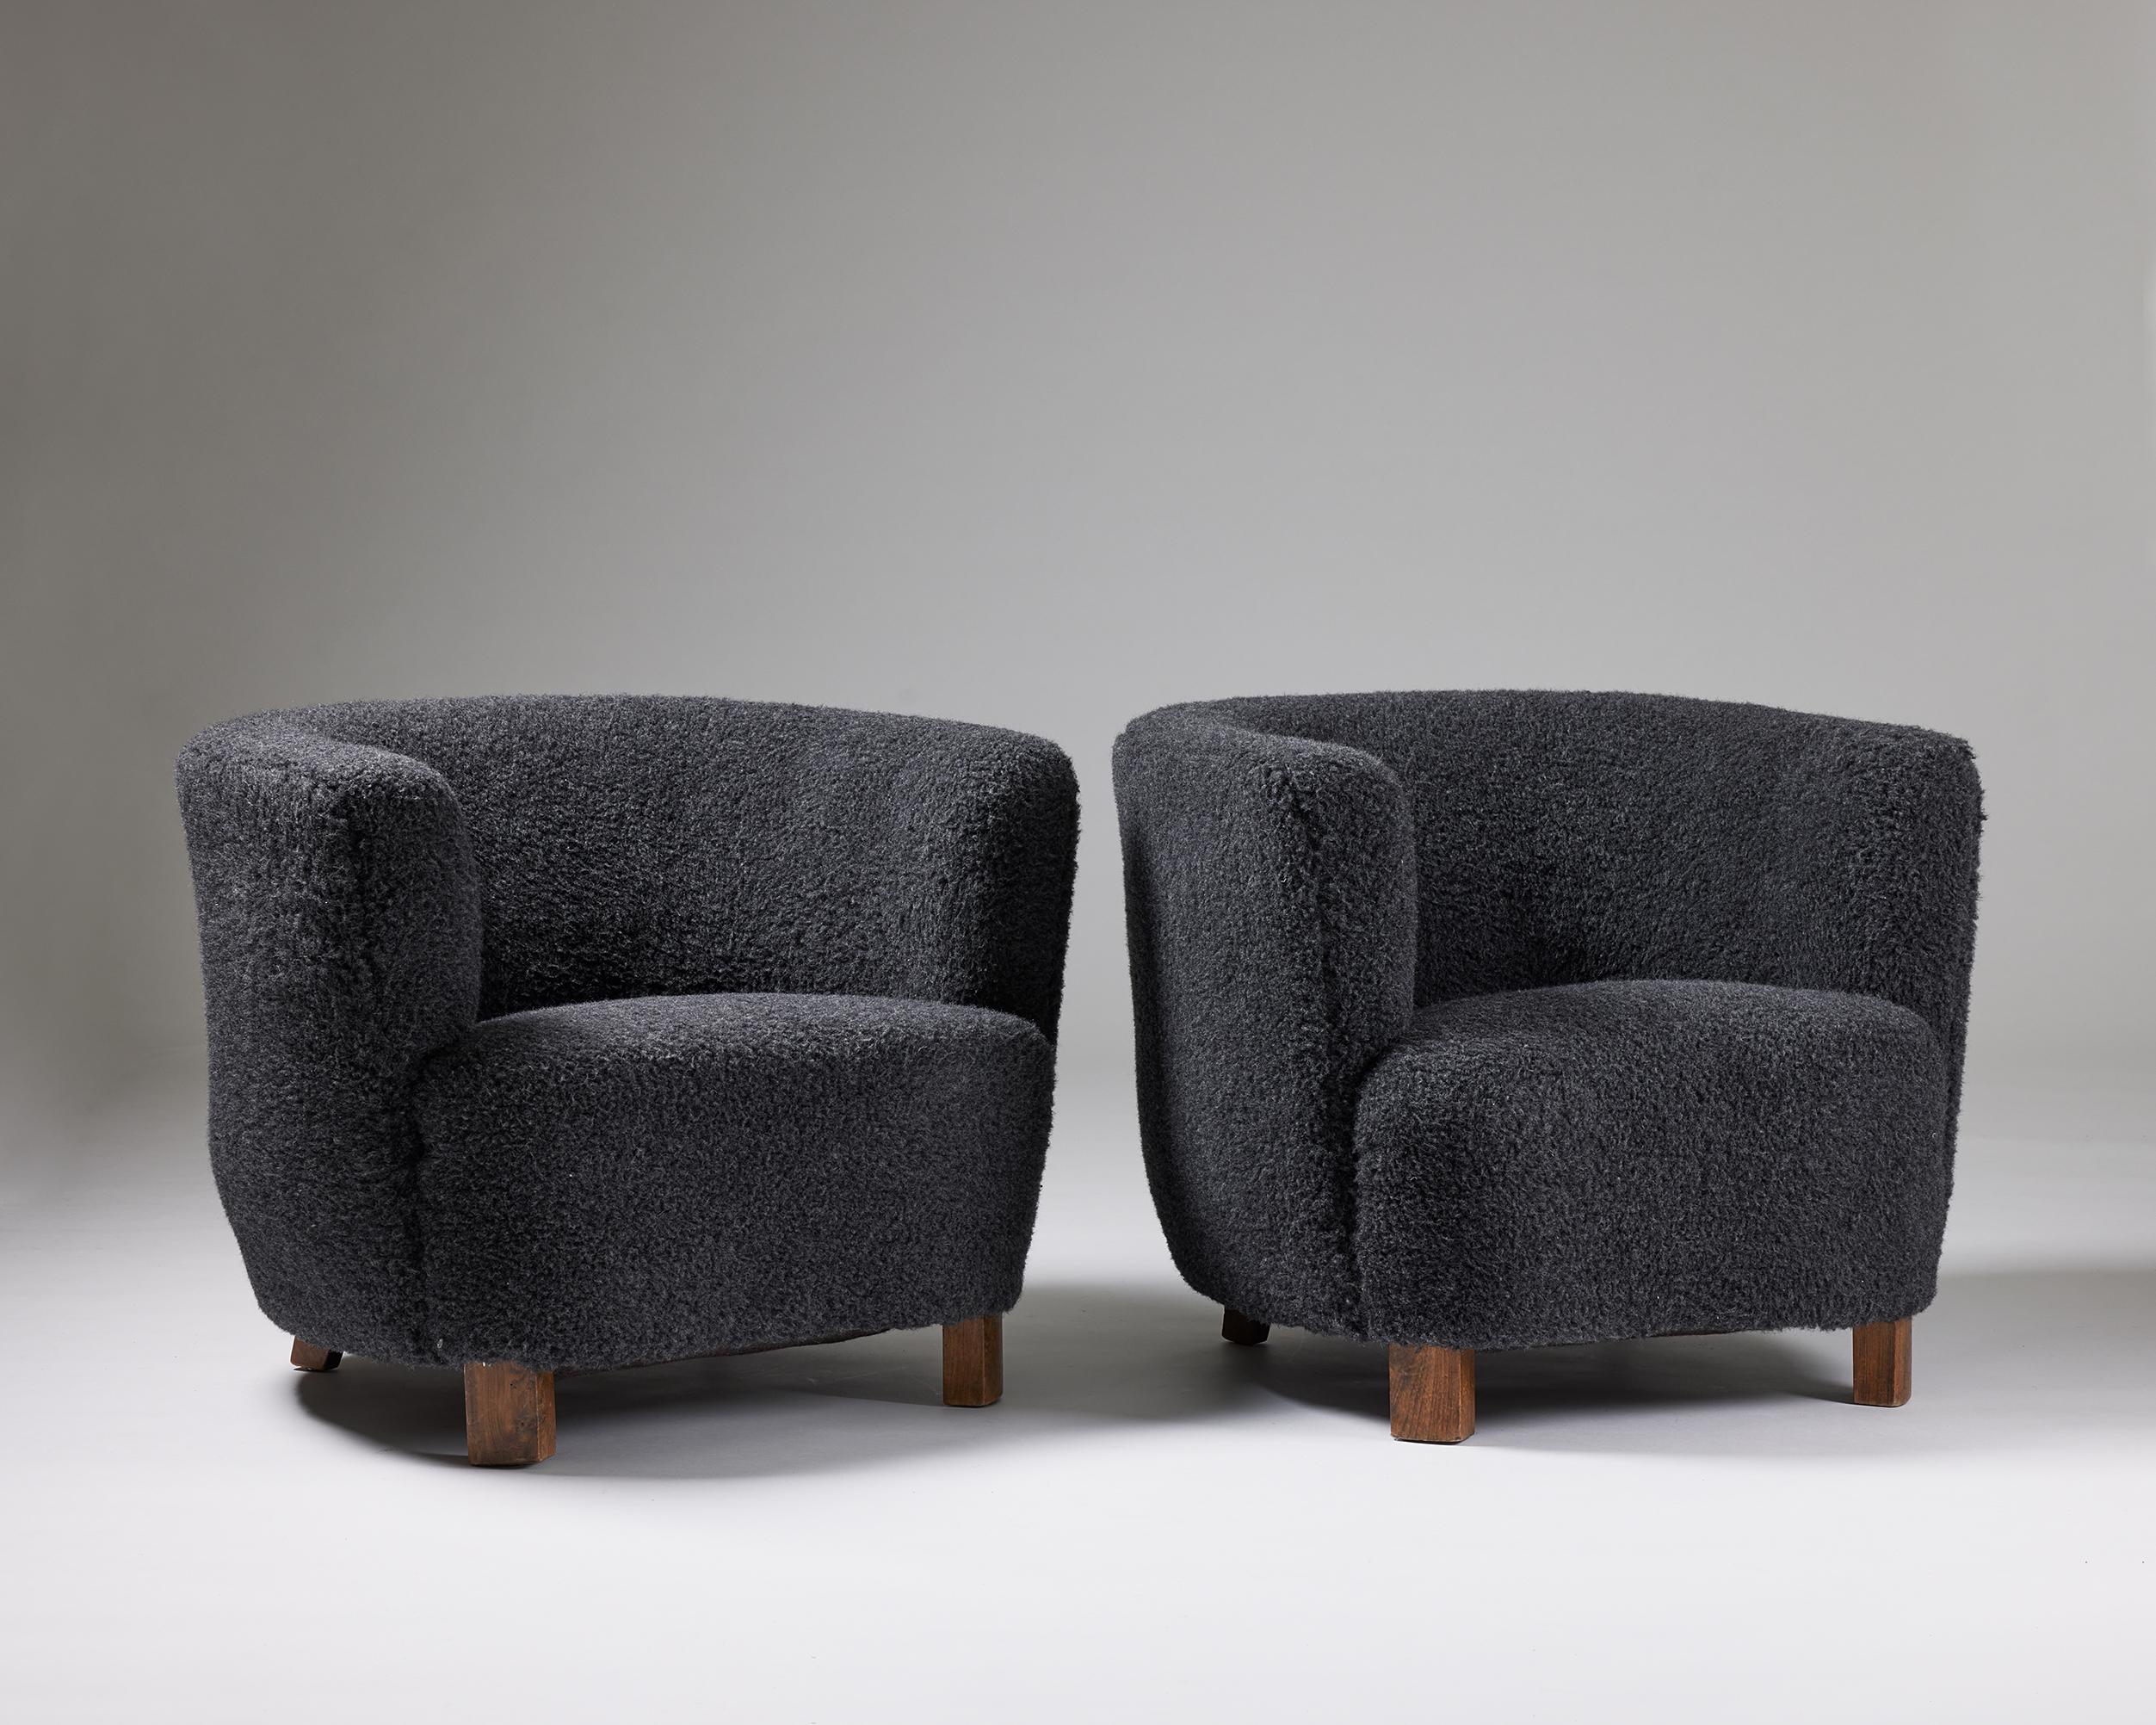 A pair of easy chairs designed by a Danish cabinetmaker,
Denmark, 1940s.

Beech and lambswool.

Measures: H: 68 cm / 2' 2 3/4''
W: 82.5 cm / 2' 8 1/2''
D: 79 cm / 2' 7''
SH: 40 cm / 15 3/4''
AH: 66 cm / 2' 2''.